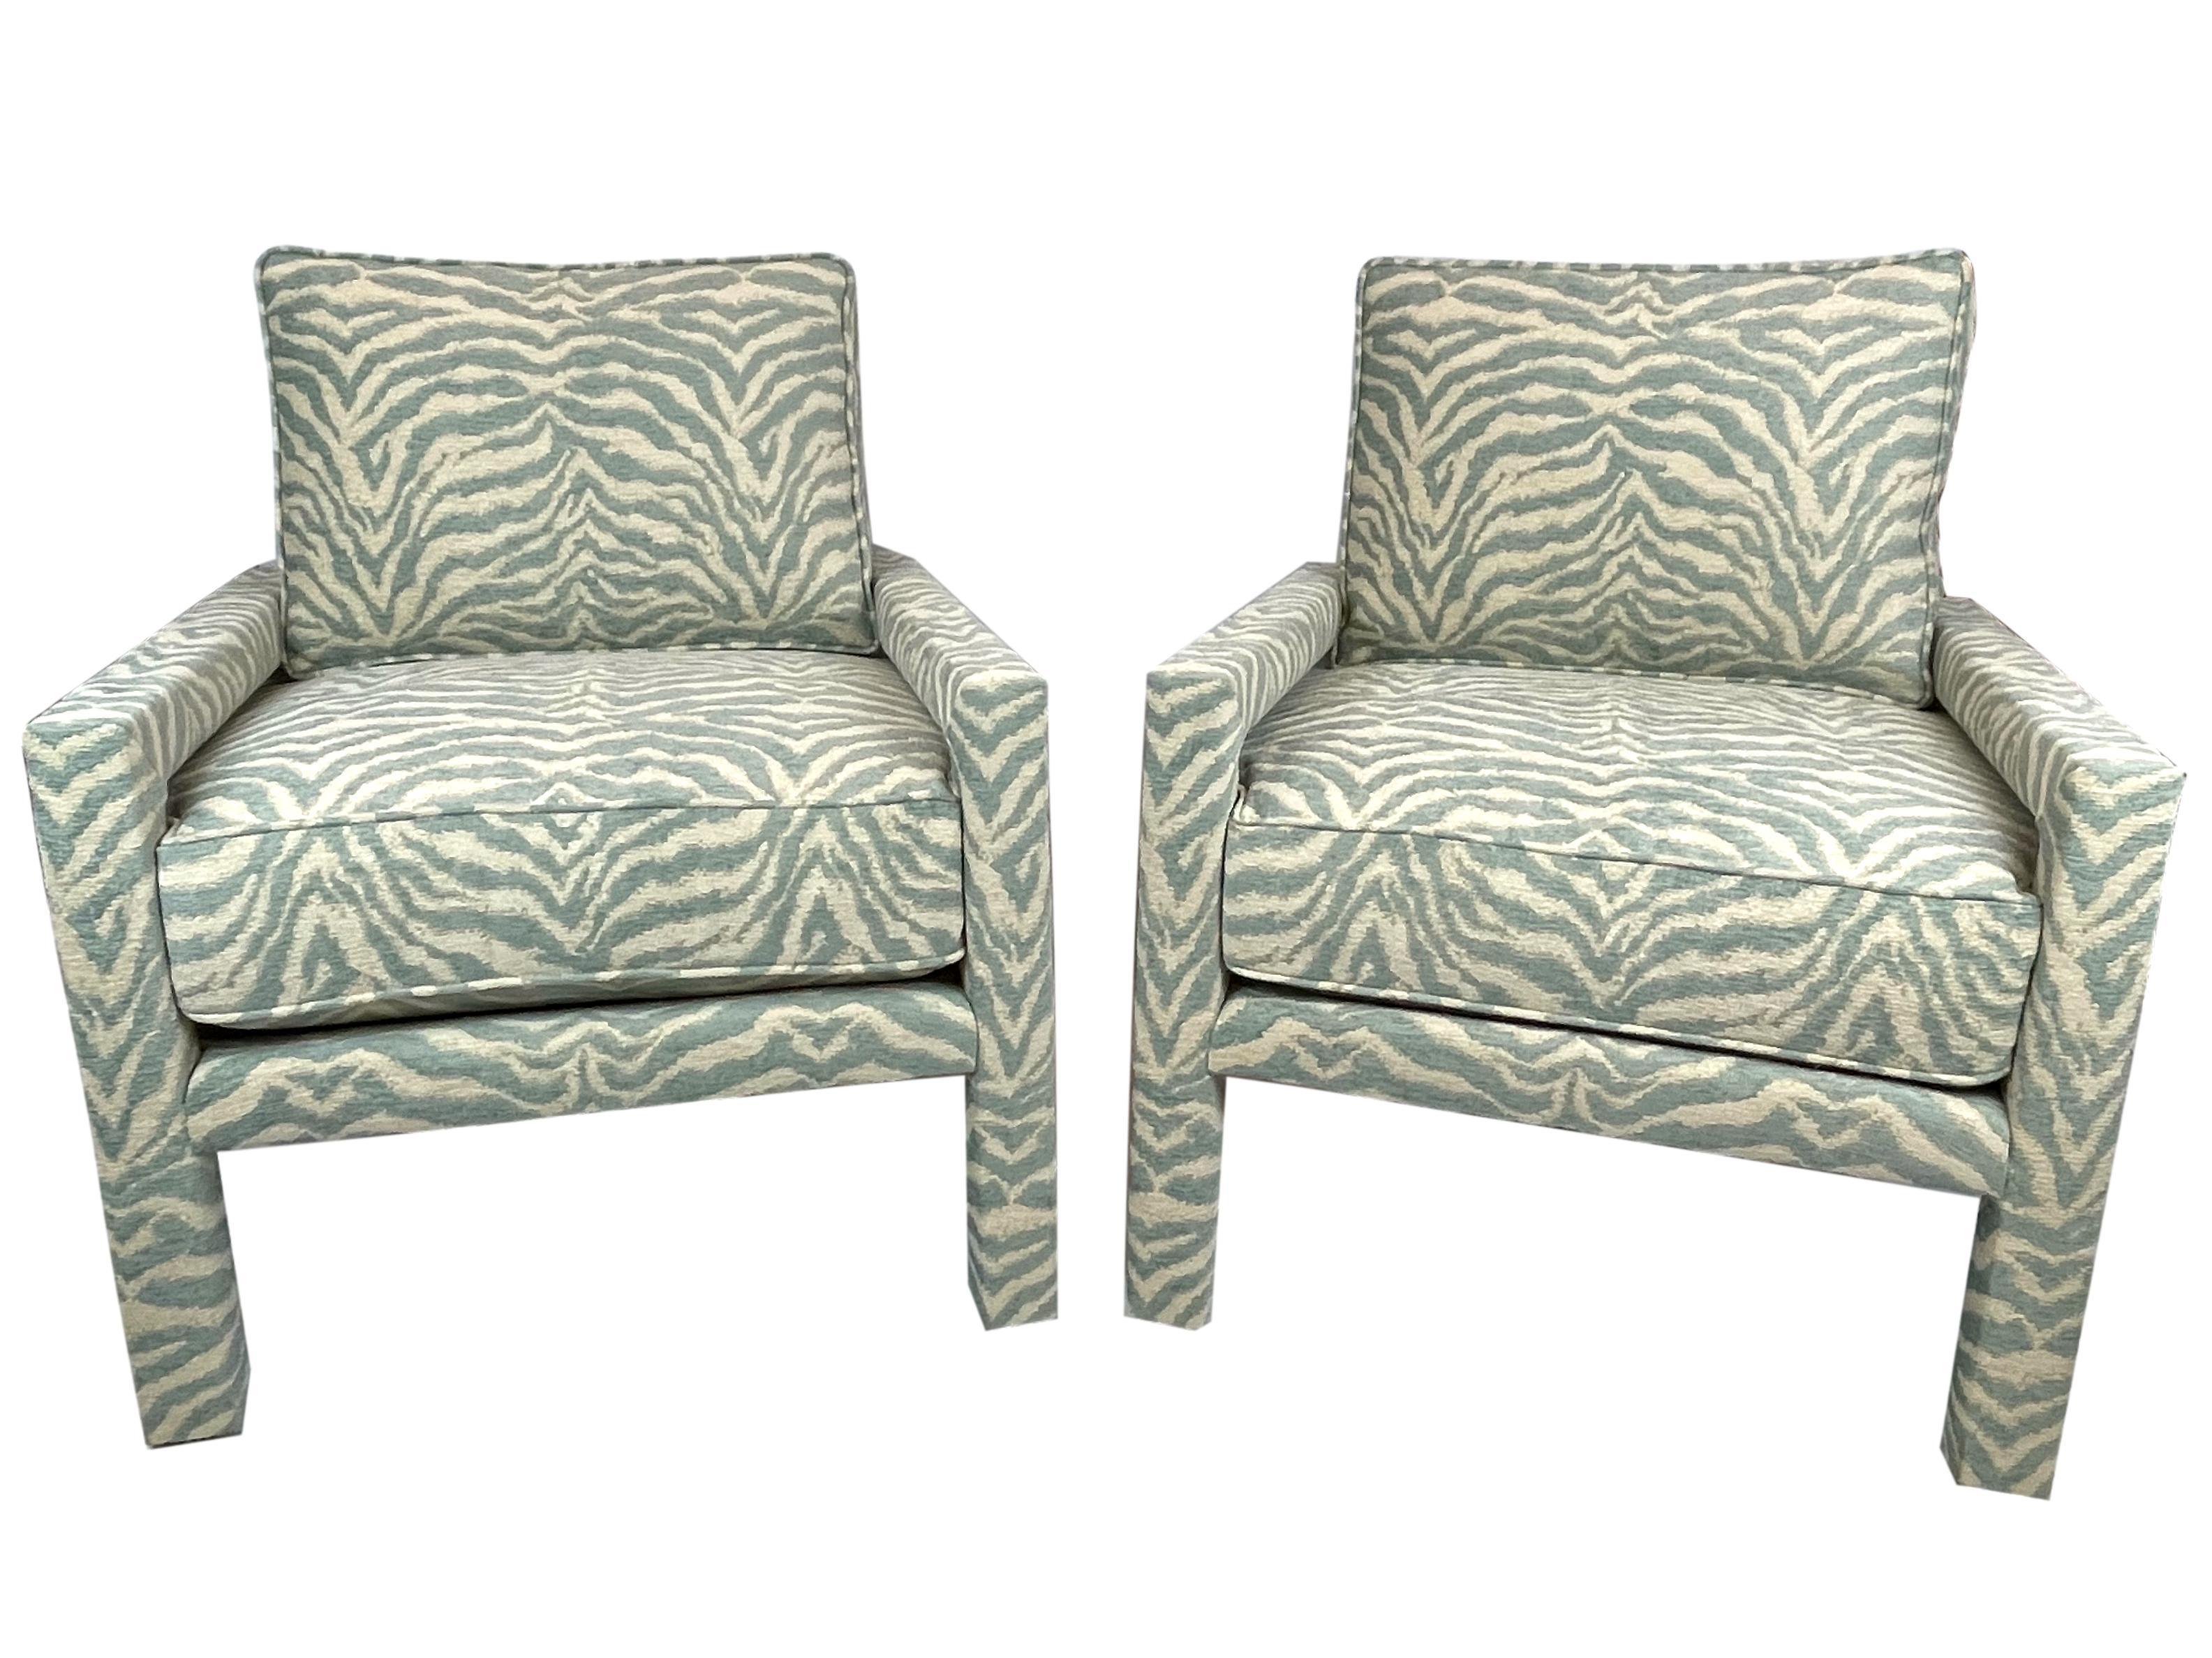 American New Pair of Milo Baughman Style Parsons Chairs in Designer Celadon Zebra Fabric For Sale